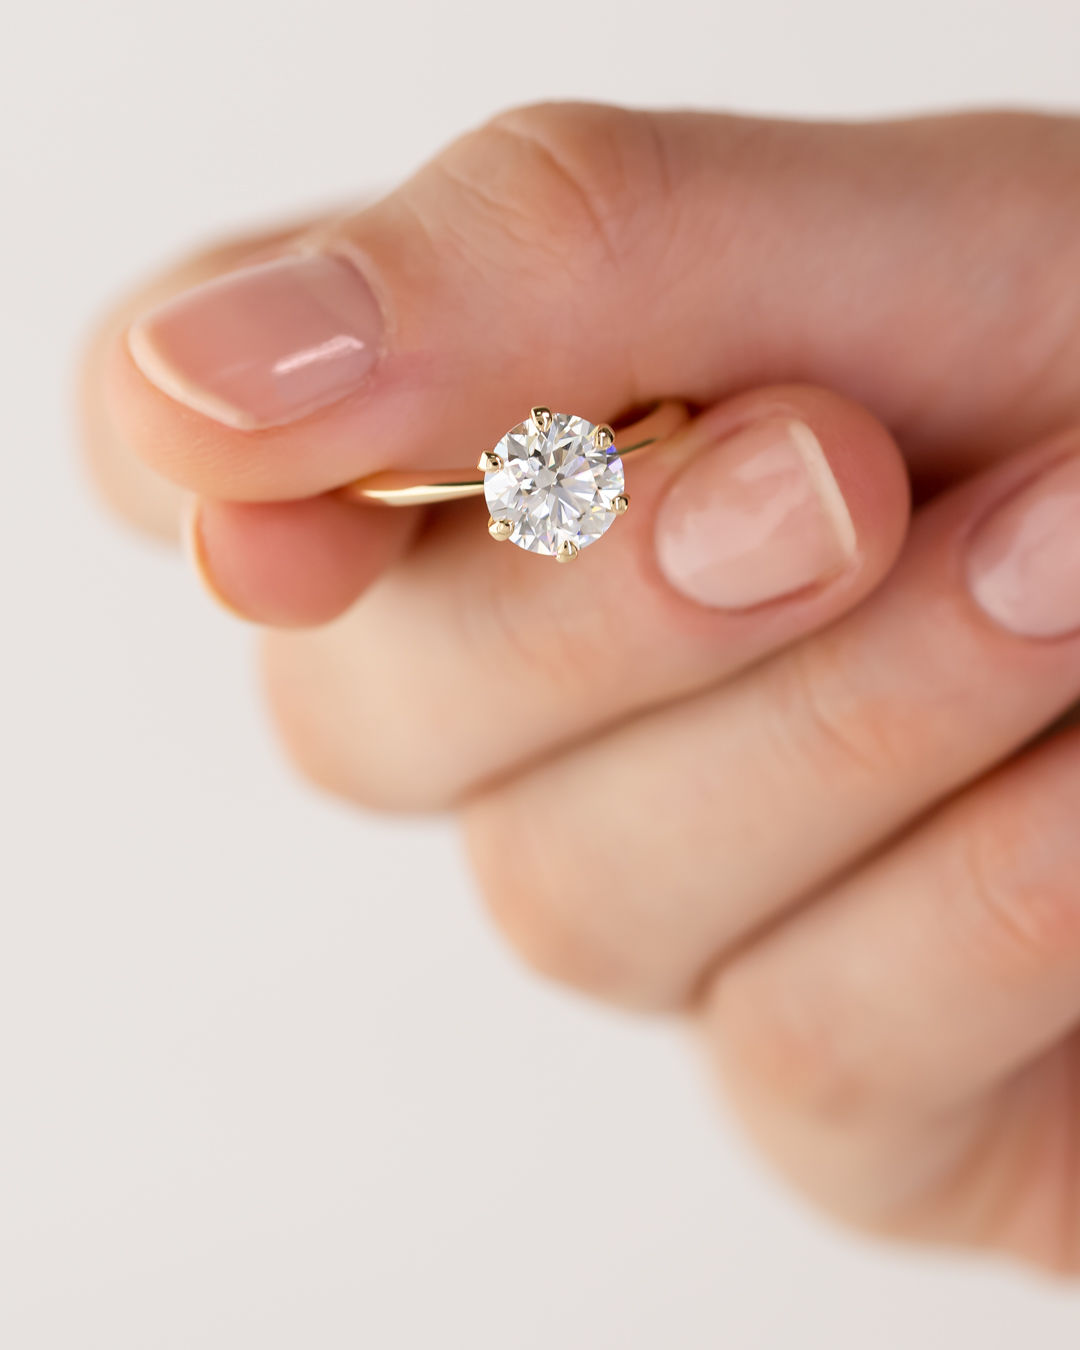 4 Engagement Ring Trends To Look Out For In 2022 Harper's Bazaar Arabia